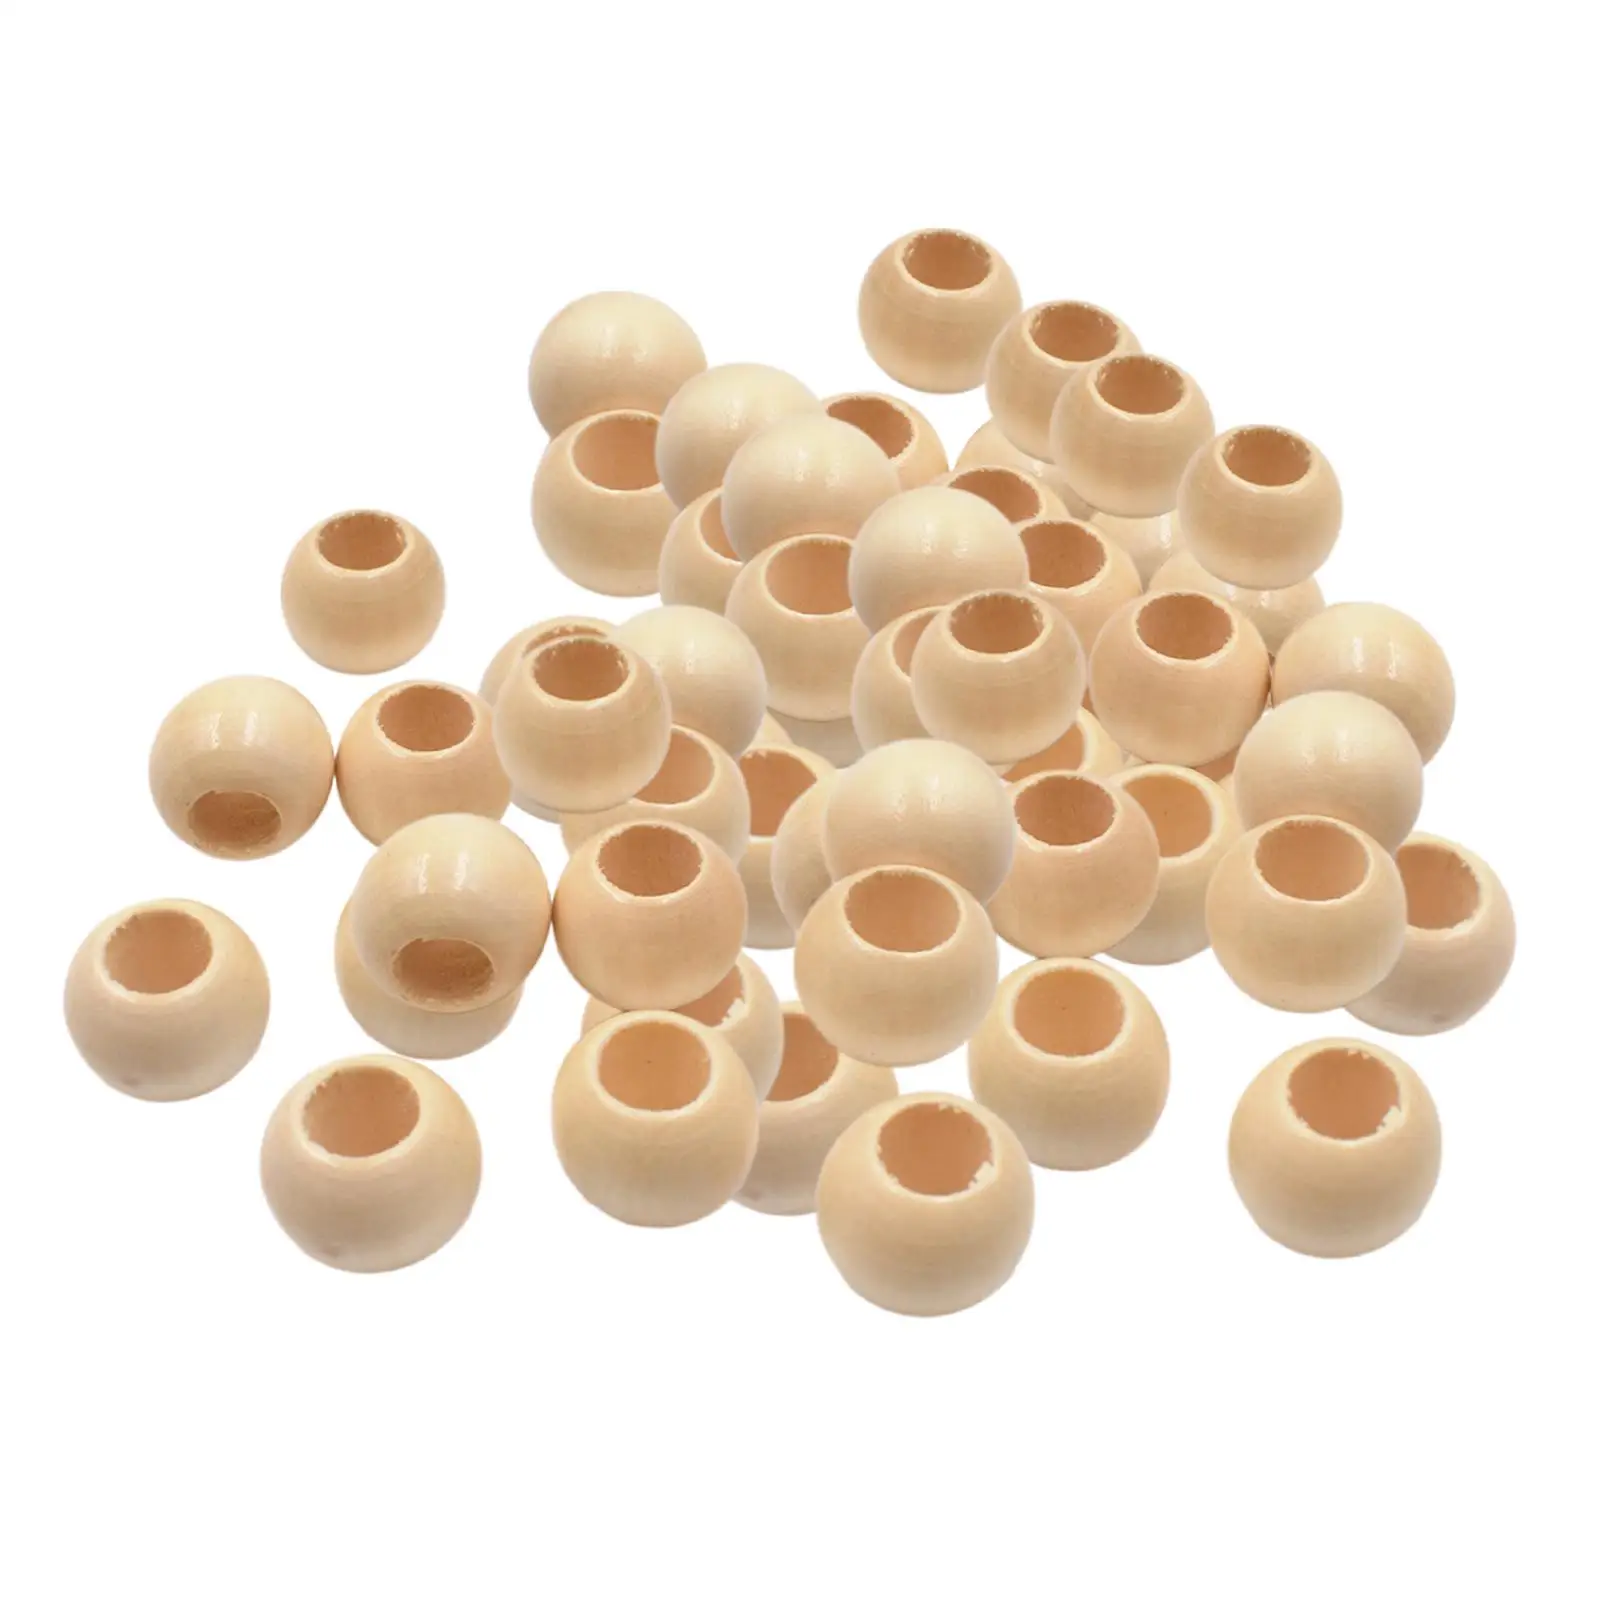 100Pcs Wooden Beads Craft 2cm Circular Bead Homemade Supplies Loose Beads Halloween Decor for Jewelry Accessories Decoration